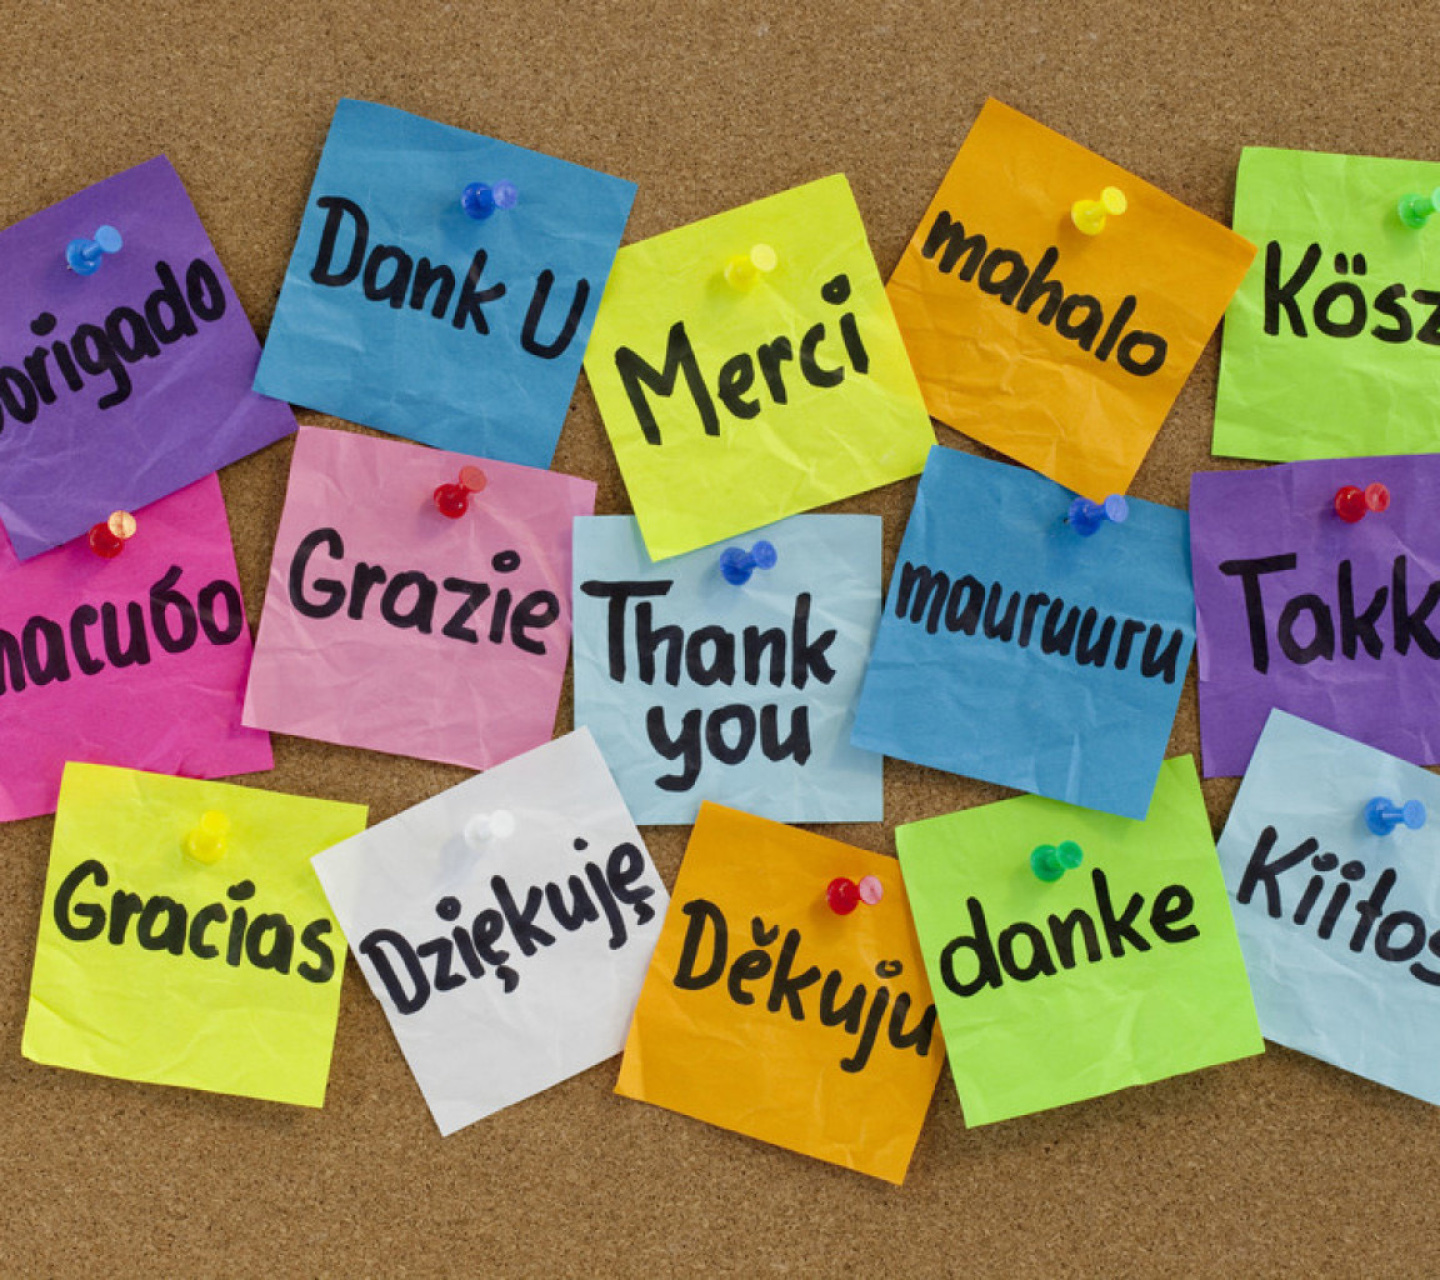 Das How To Say Thank You in Different Languages Wallpaper 1440x1280